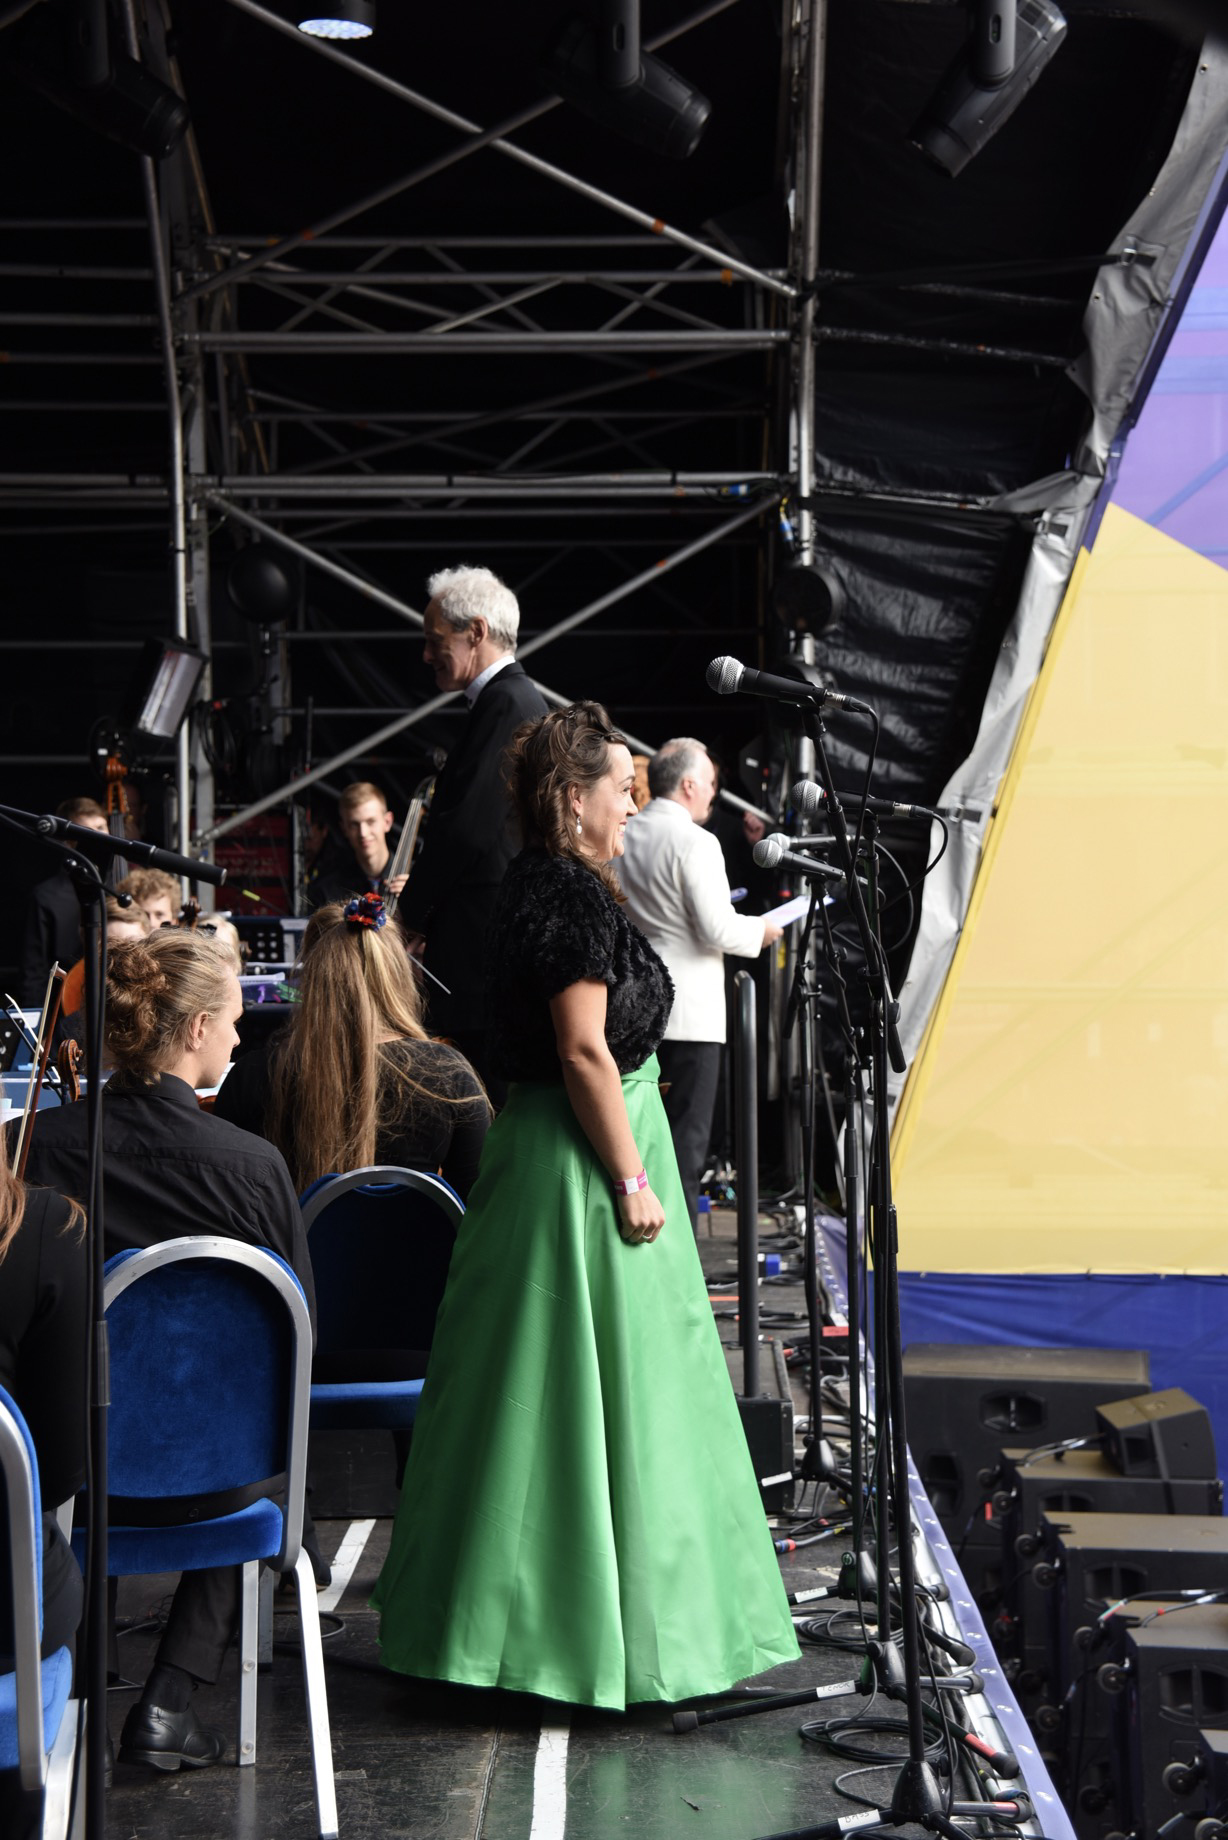 <p>Mezzo-soprano Rebecca Afowny-Jones on stage with the Orchestra in Glasgow\'s George Square. Part of Festival 2018, Glasgow\'s cultural celebrations that ran alongside the European Championship Games, August 2018.</p>